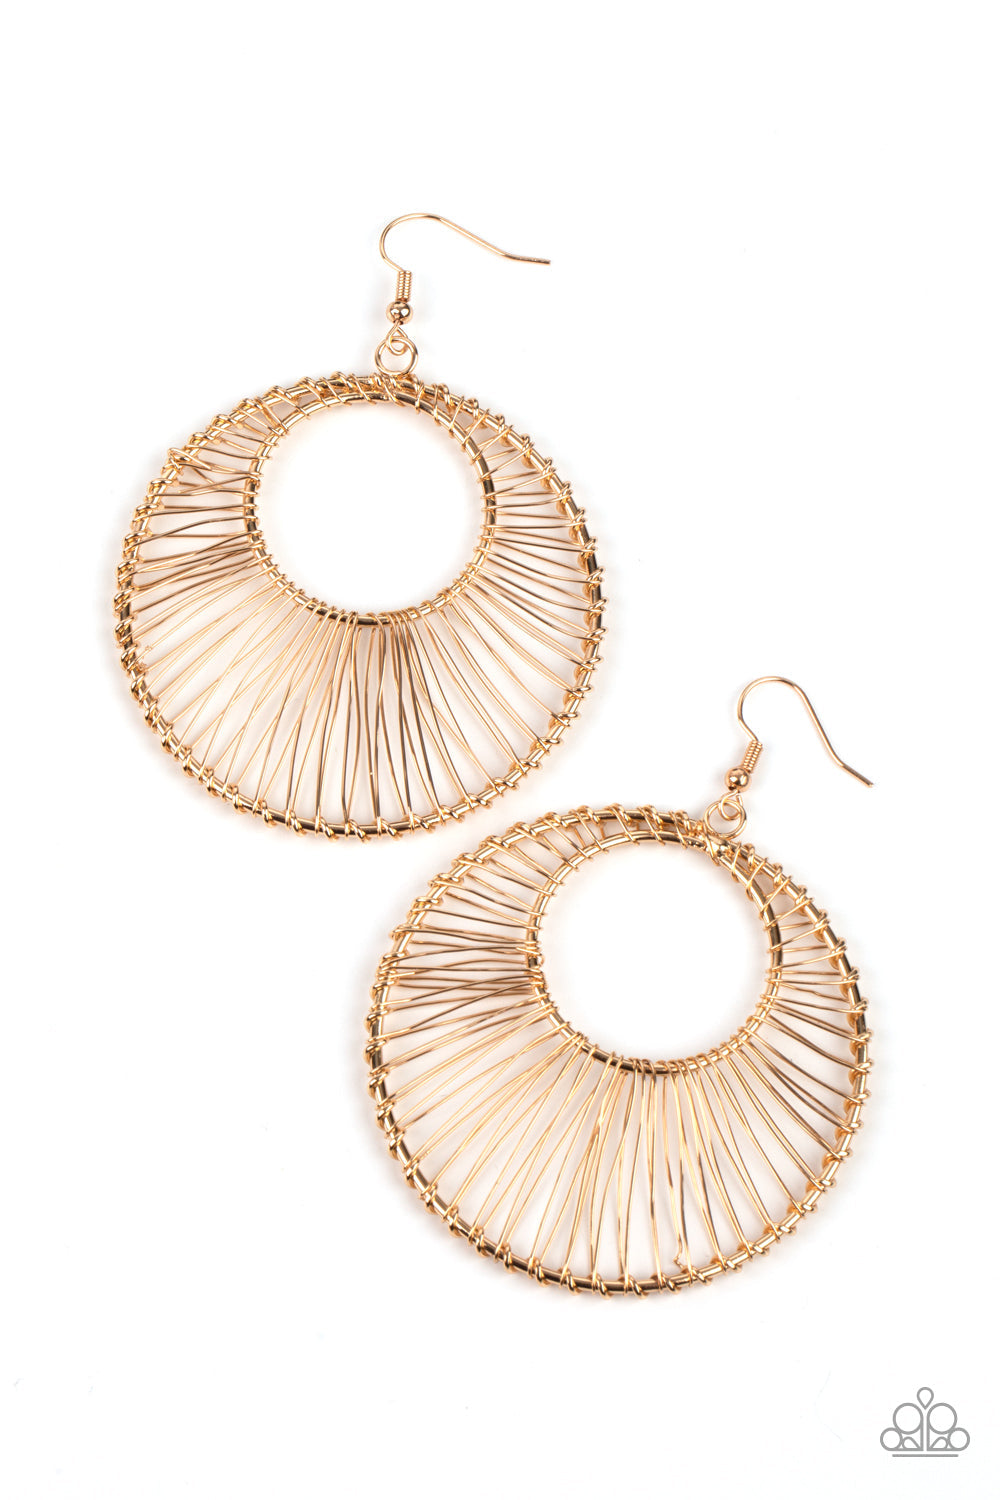 Artisan Applique - Gold Fashion Earrings - Paparazzi Accessories - Glistening gold wire wraps around two gold hoops, creating an airy crescent shaped frame for an artisan inspired fashion earrings.